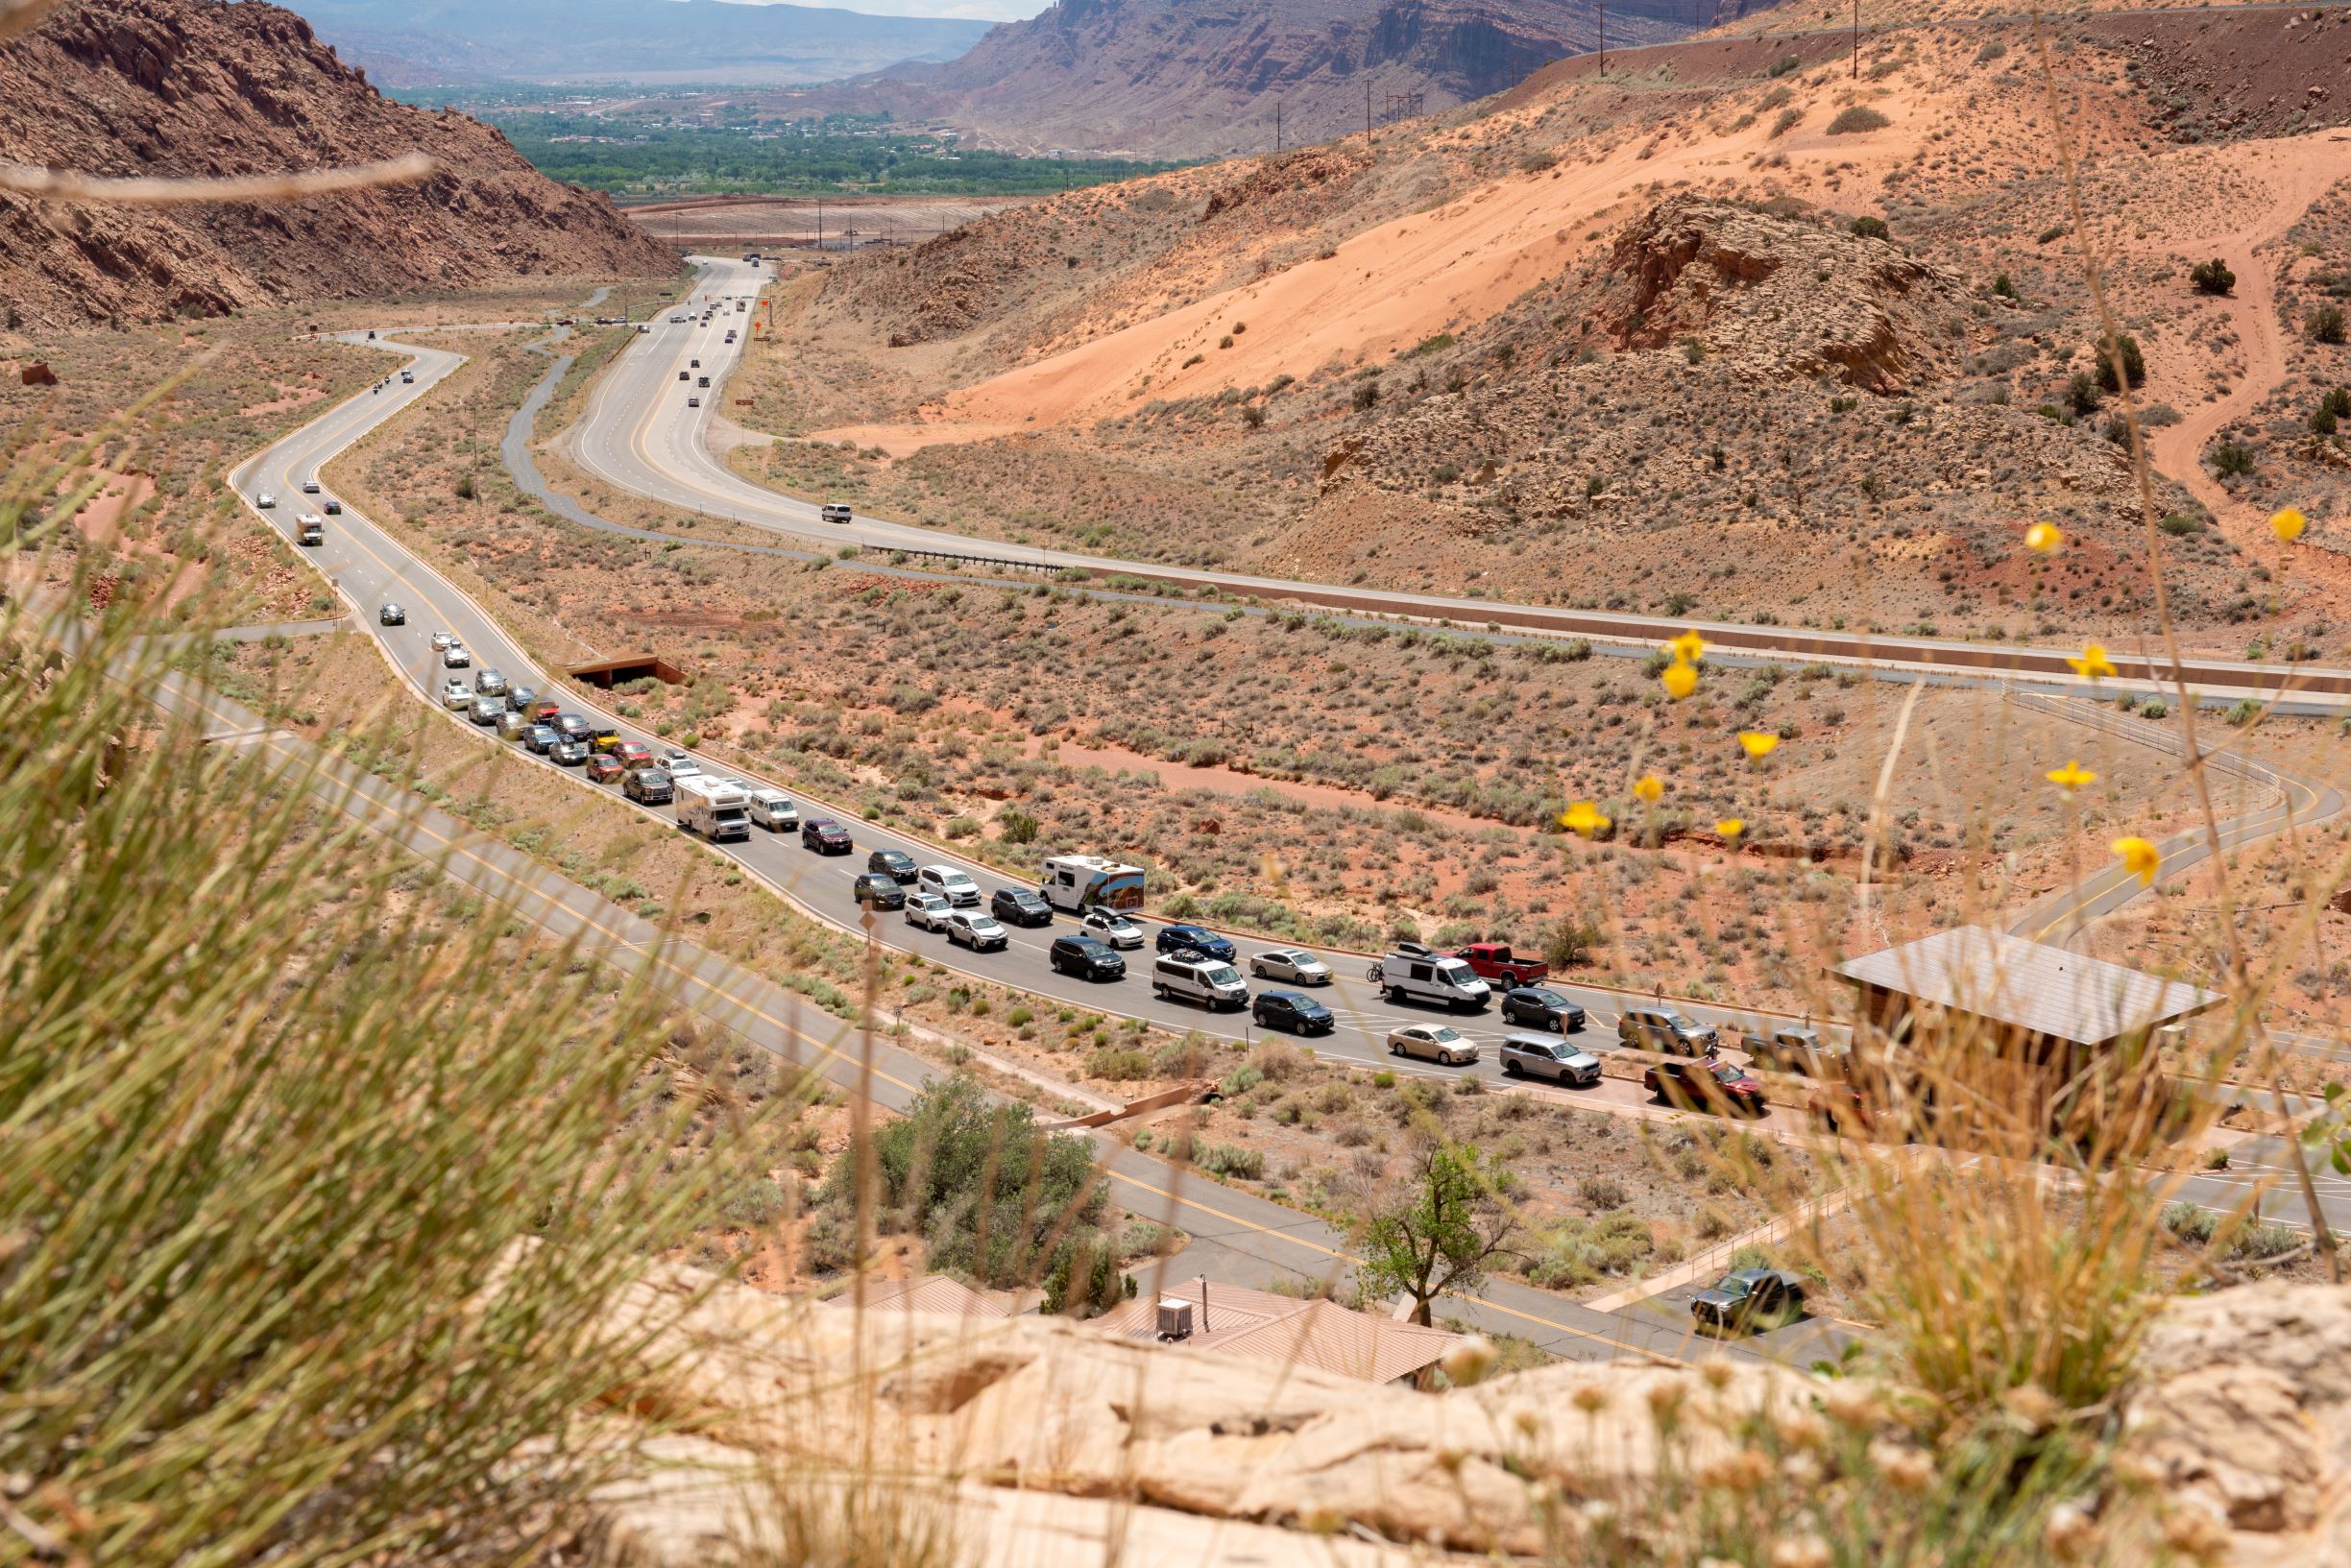 A line of vehicles waits behind the entrance booths on the Arches National Park entrance road to enter the park.